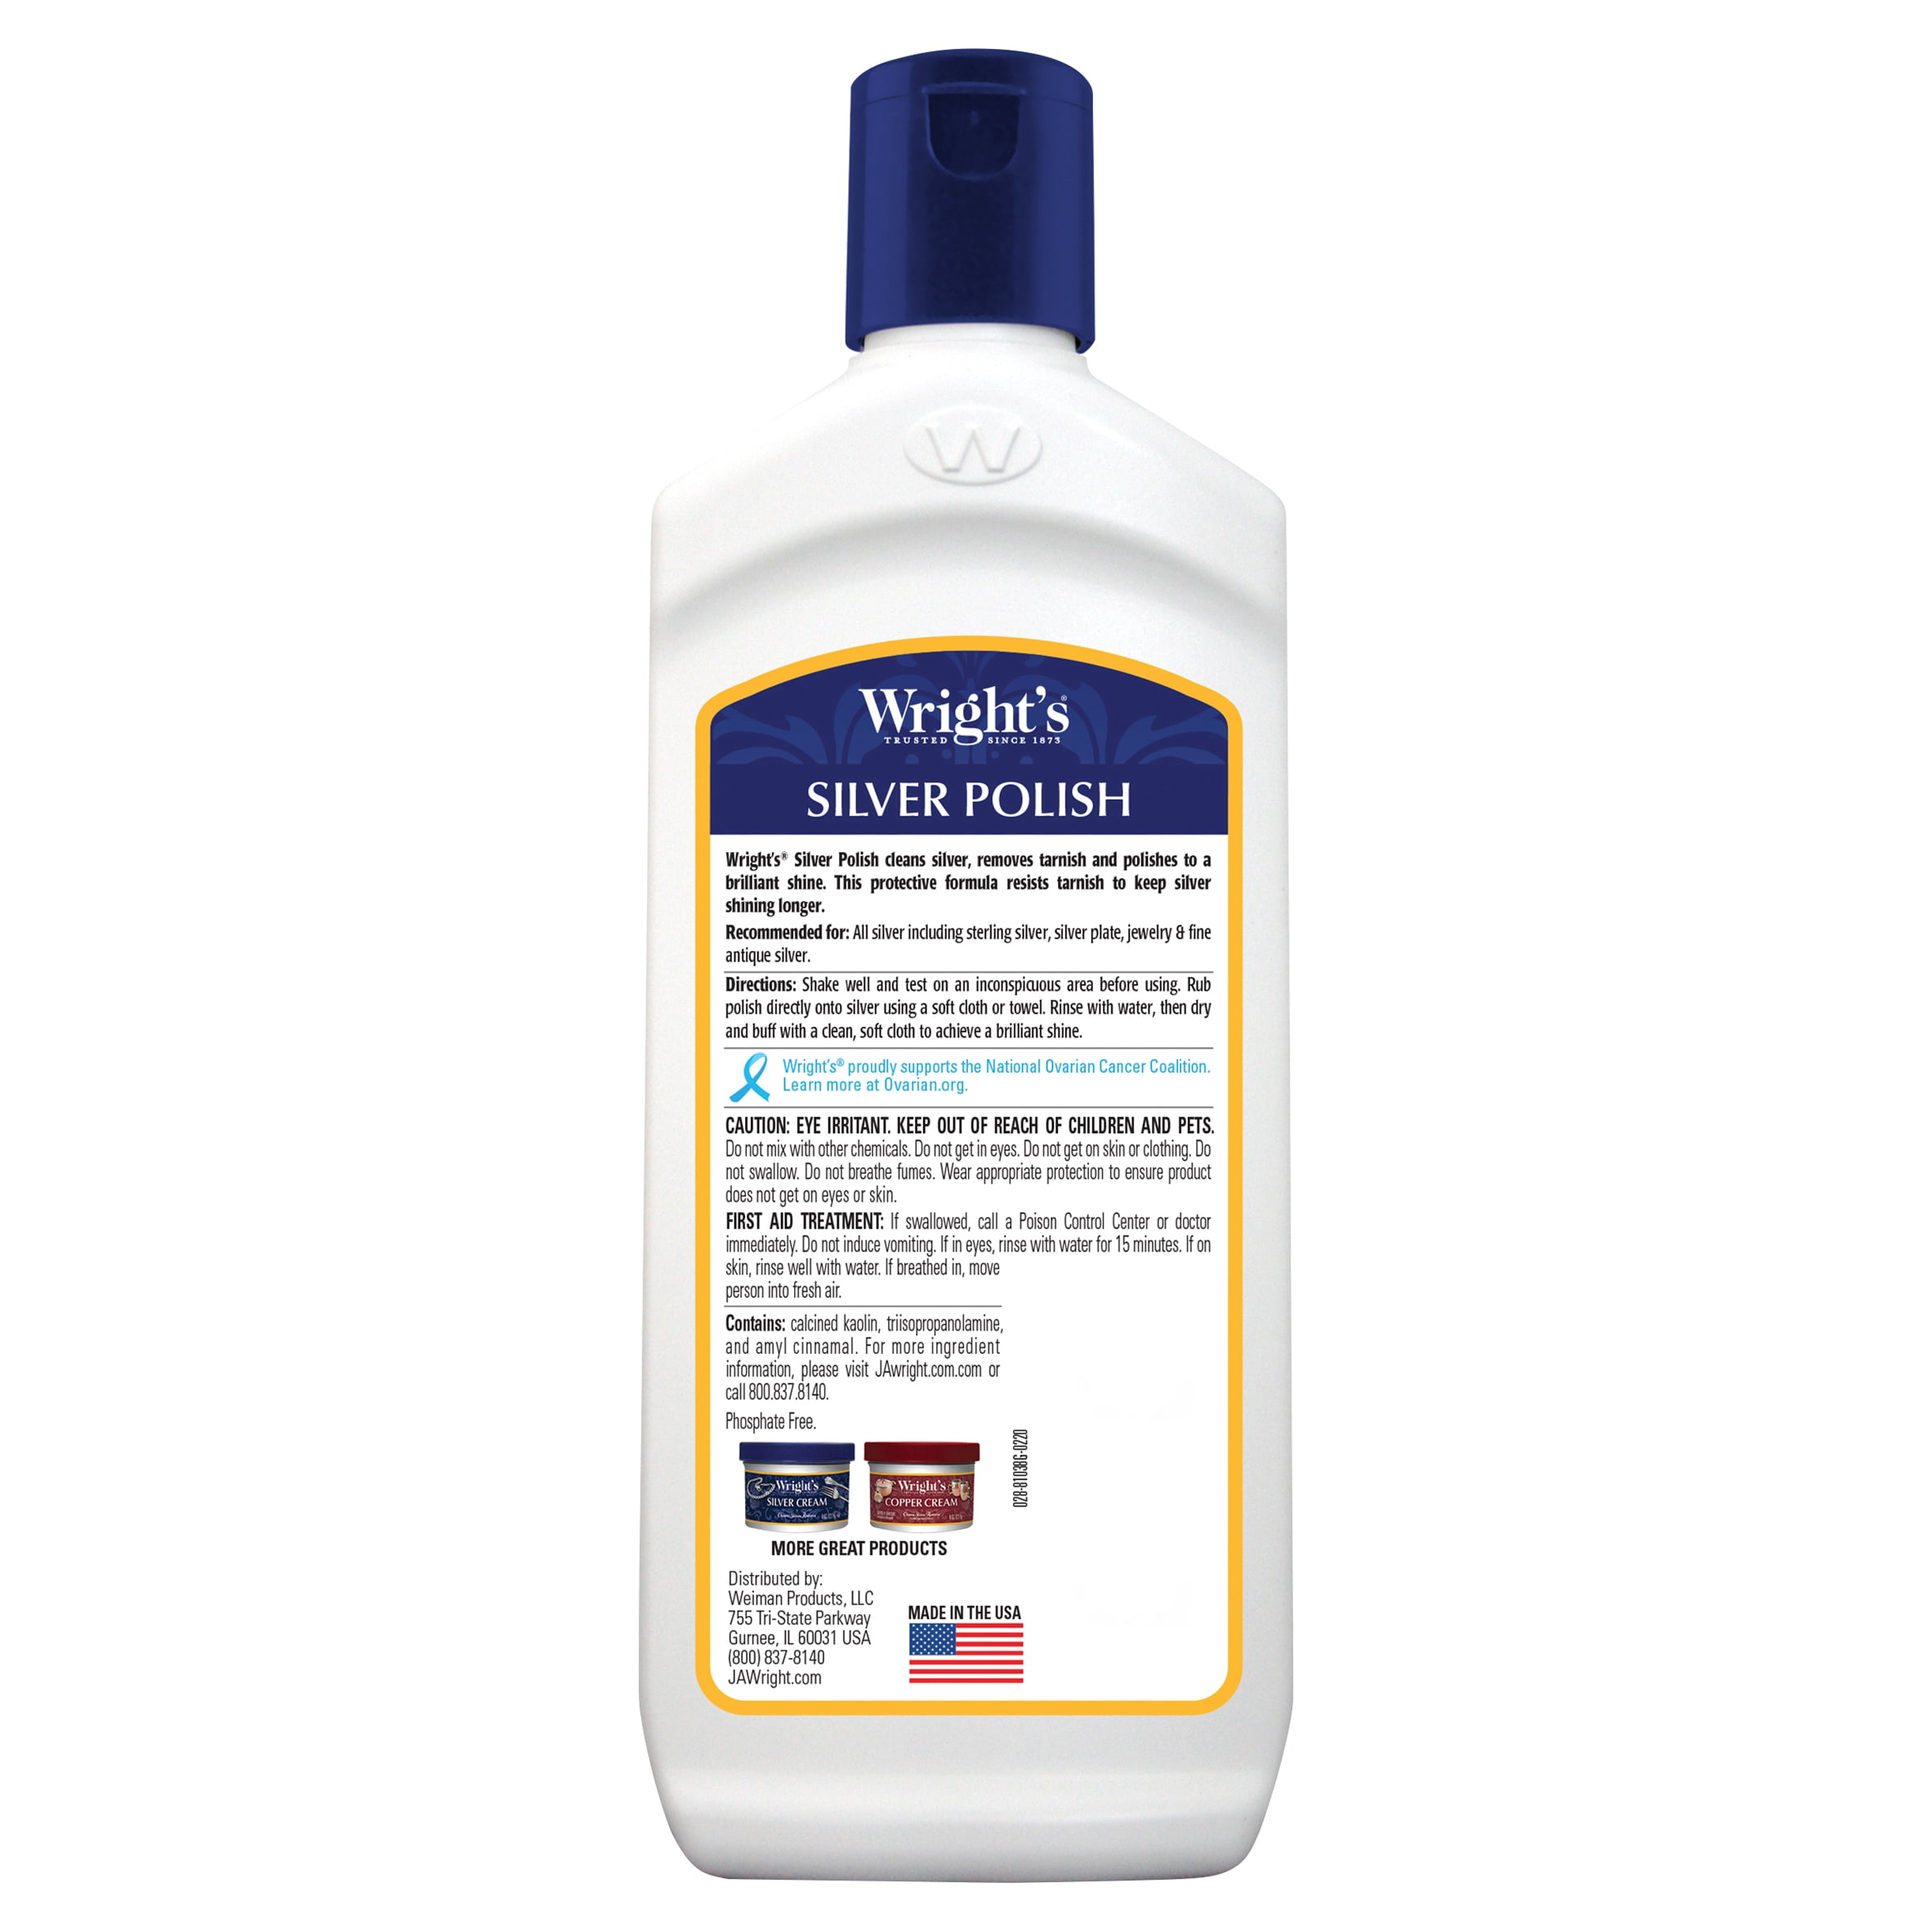 Wright's Silver Cream 8oz, WRIGHTS, All Brands